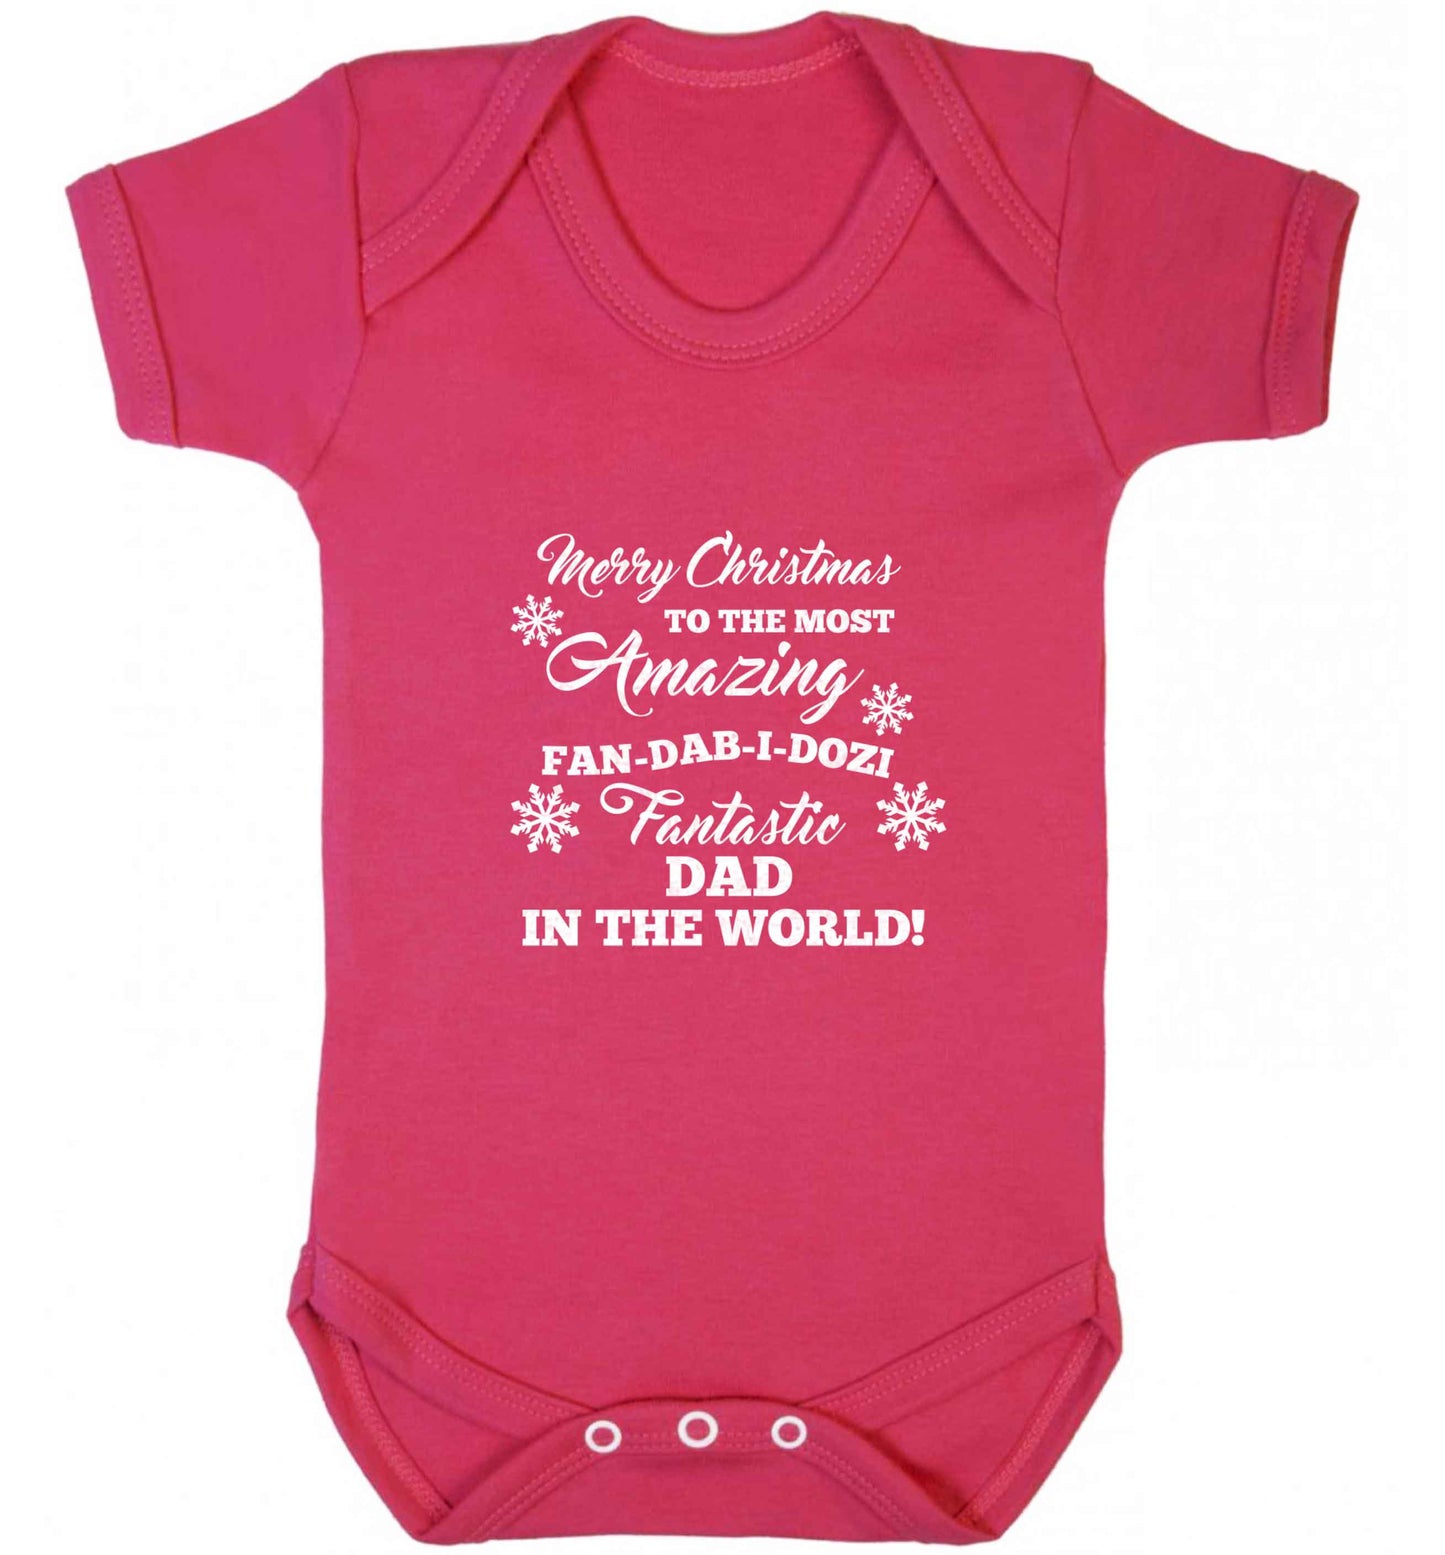 Merry Christmas to the most amazing fan-dab-i-dozi fantasic Dad in the world baby vest dark pink 18-24 months